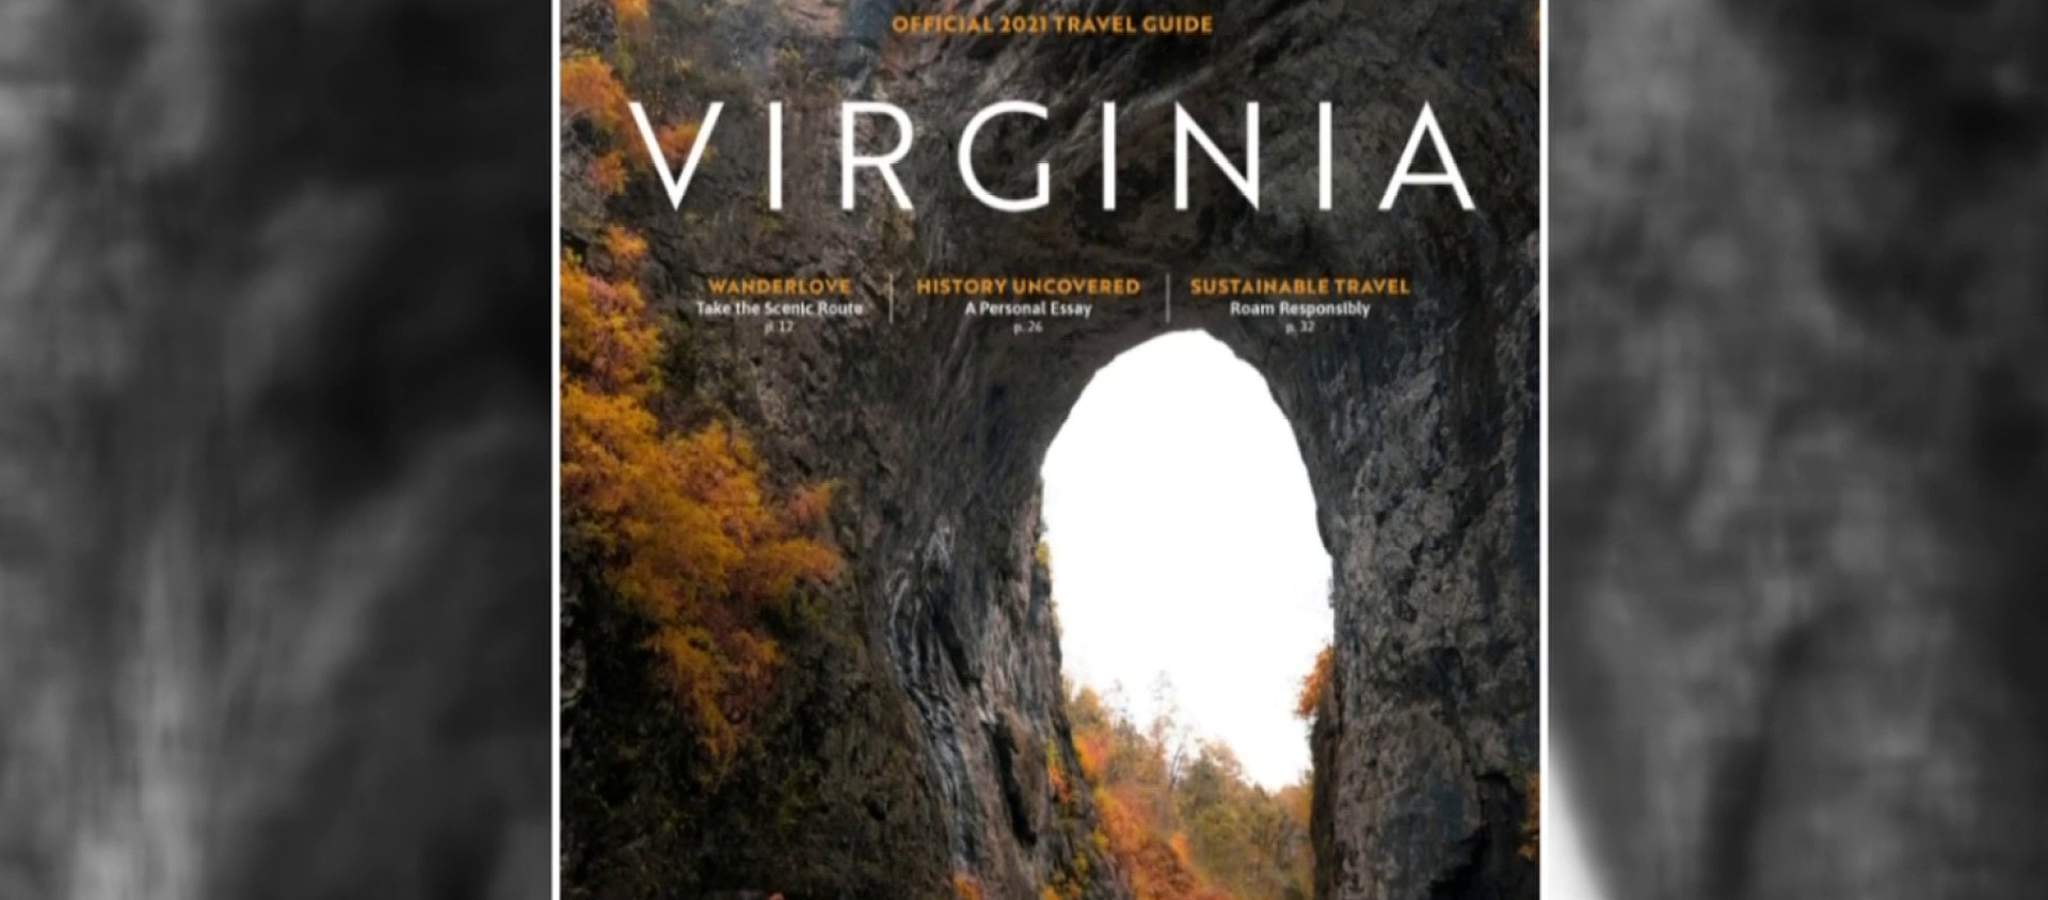 Natural Bridge State Park featured on 2021 Virginia Travel Guide cover